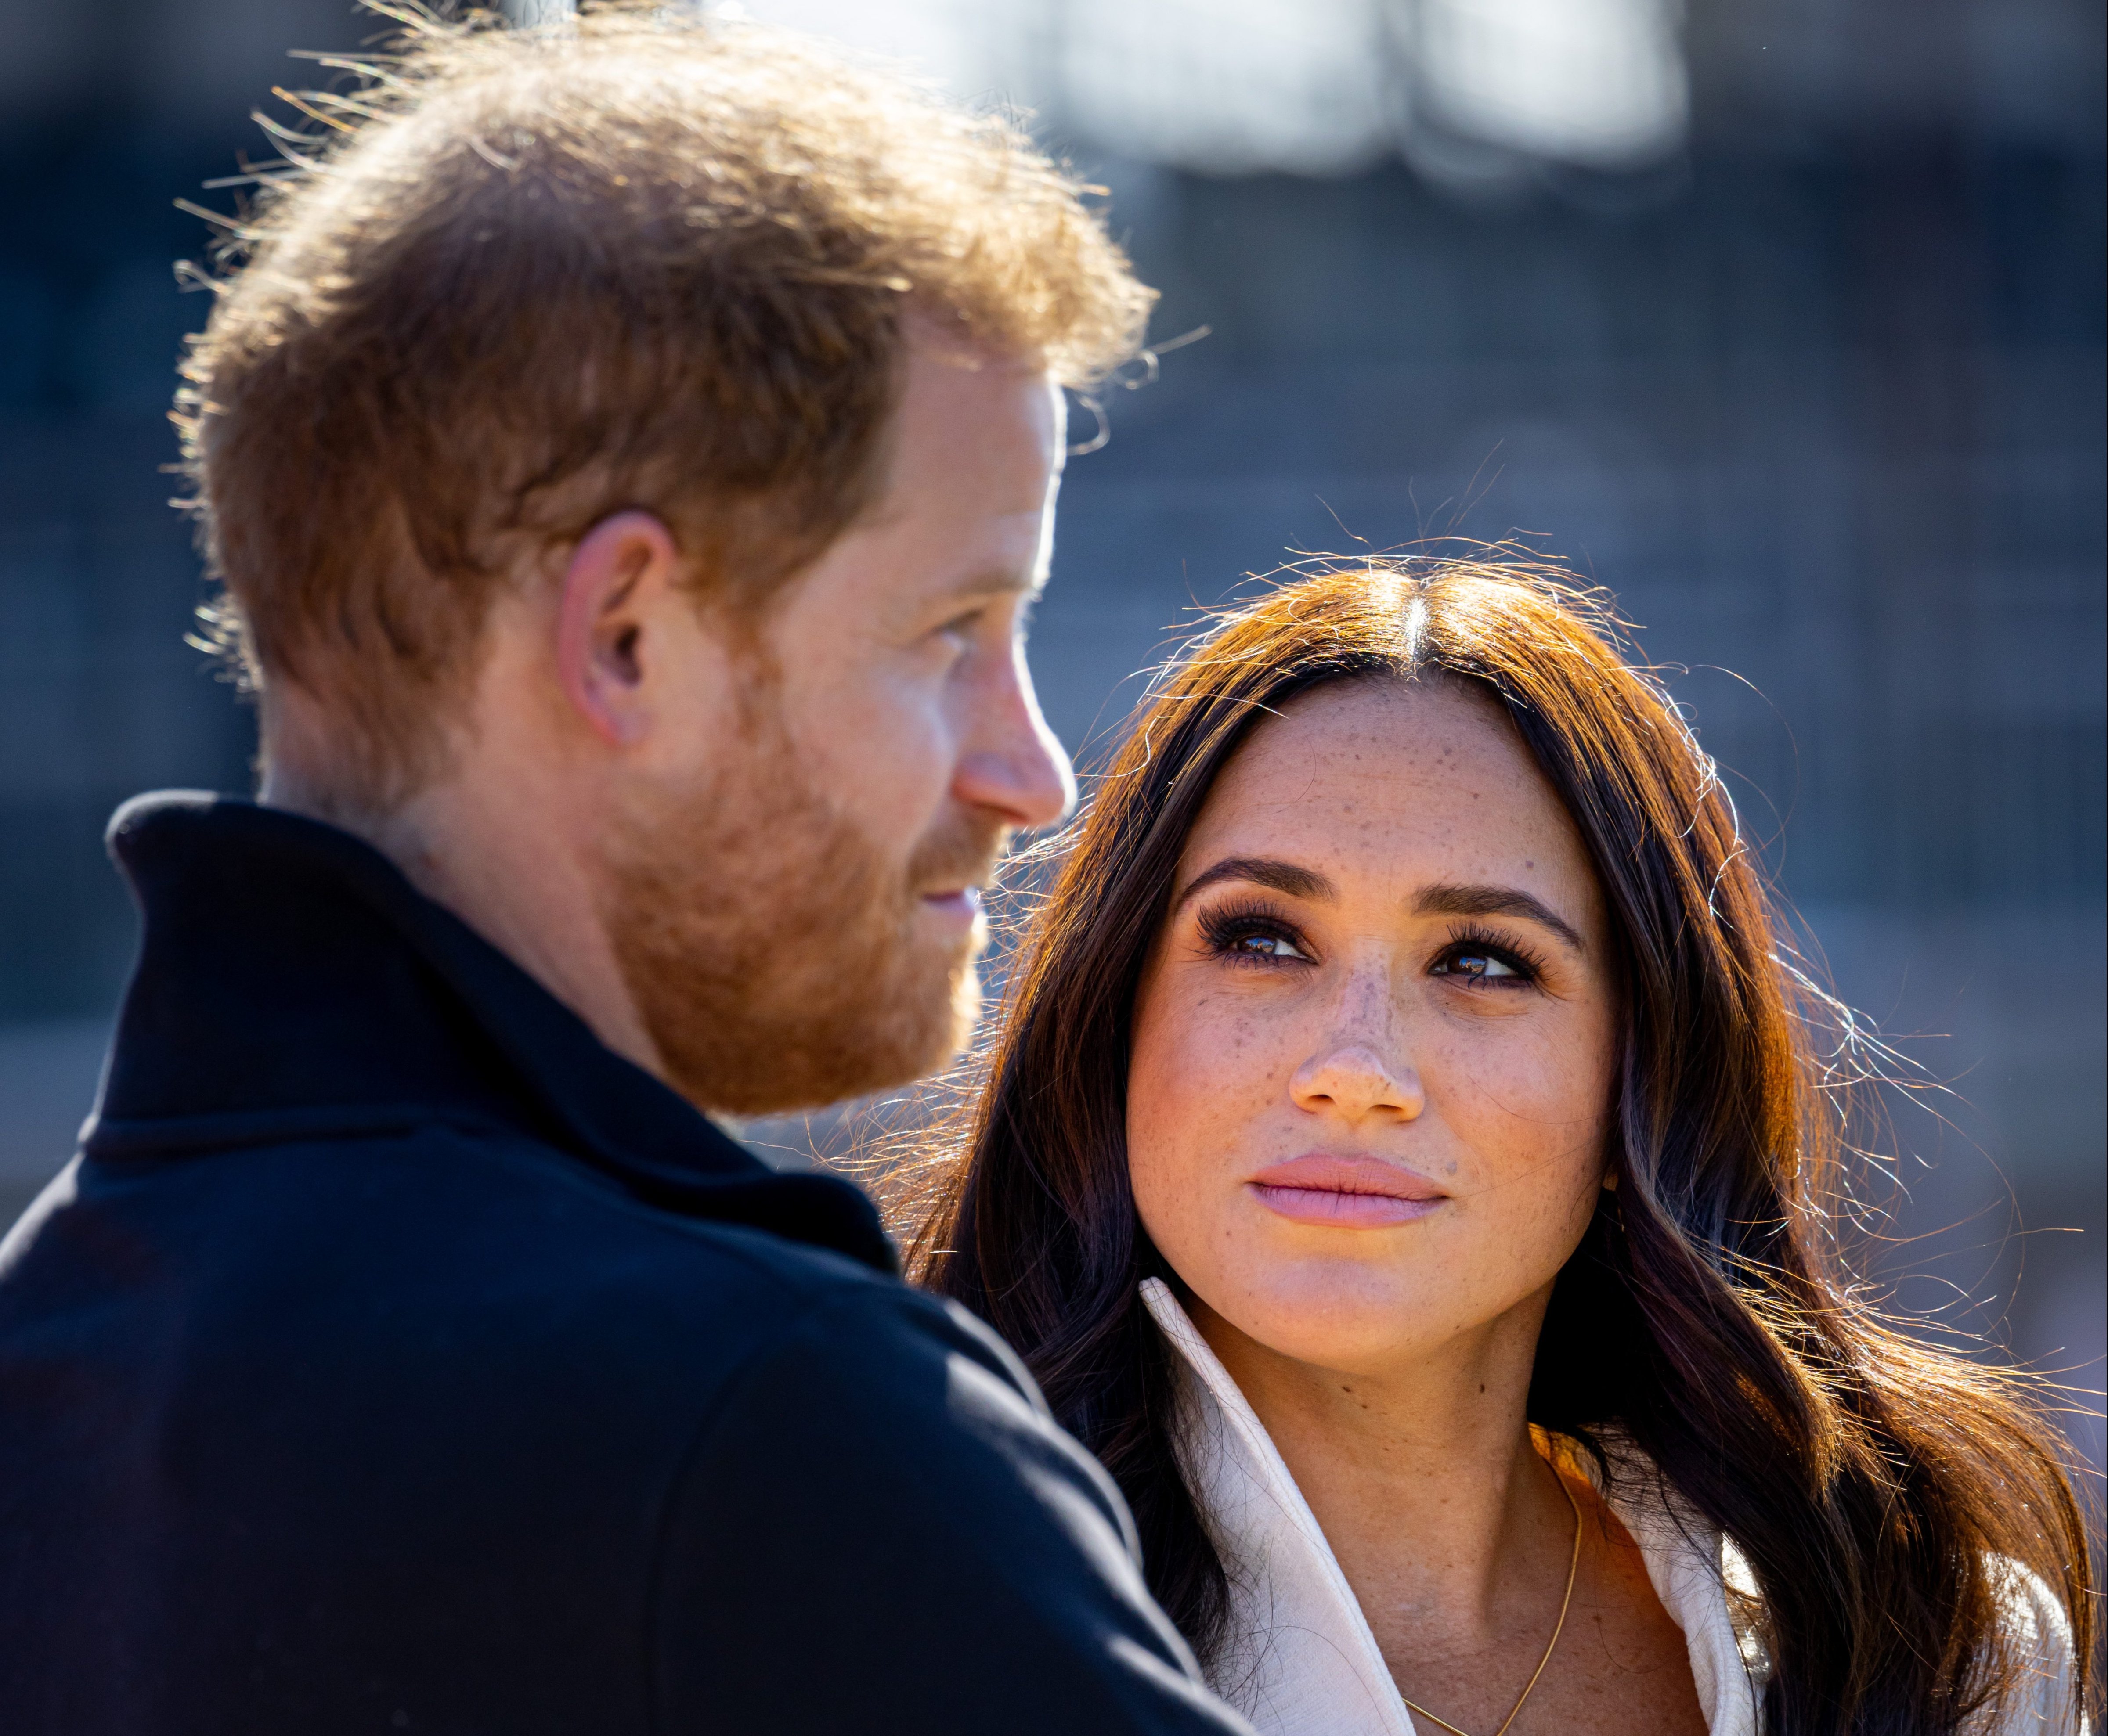 Prince Harry, Duke of Sussex, and Meghan, Duchess of Sussex, have been evicted from their royal home. (Patrick van Katwijk/Getty Images)